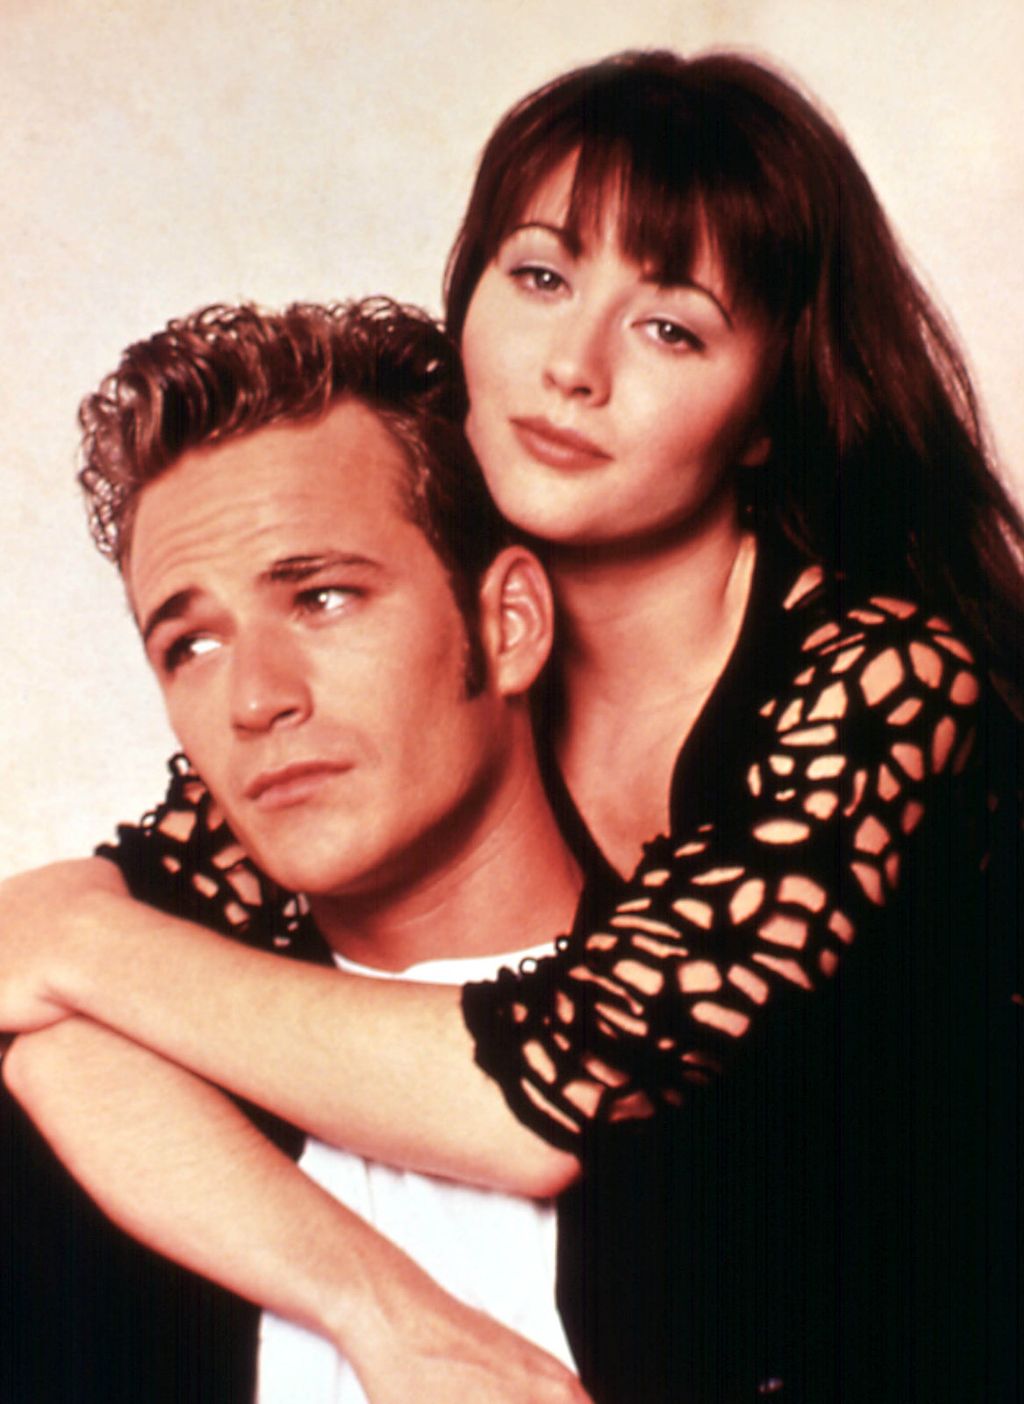 Dylan McKay (Luke Perry, Beverly Hills 90201)